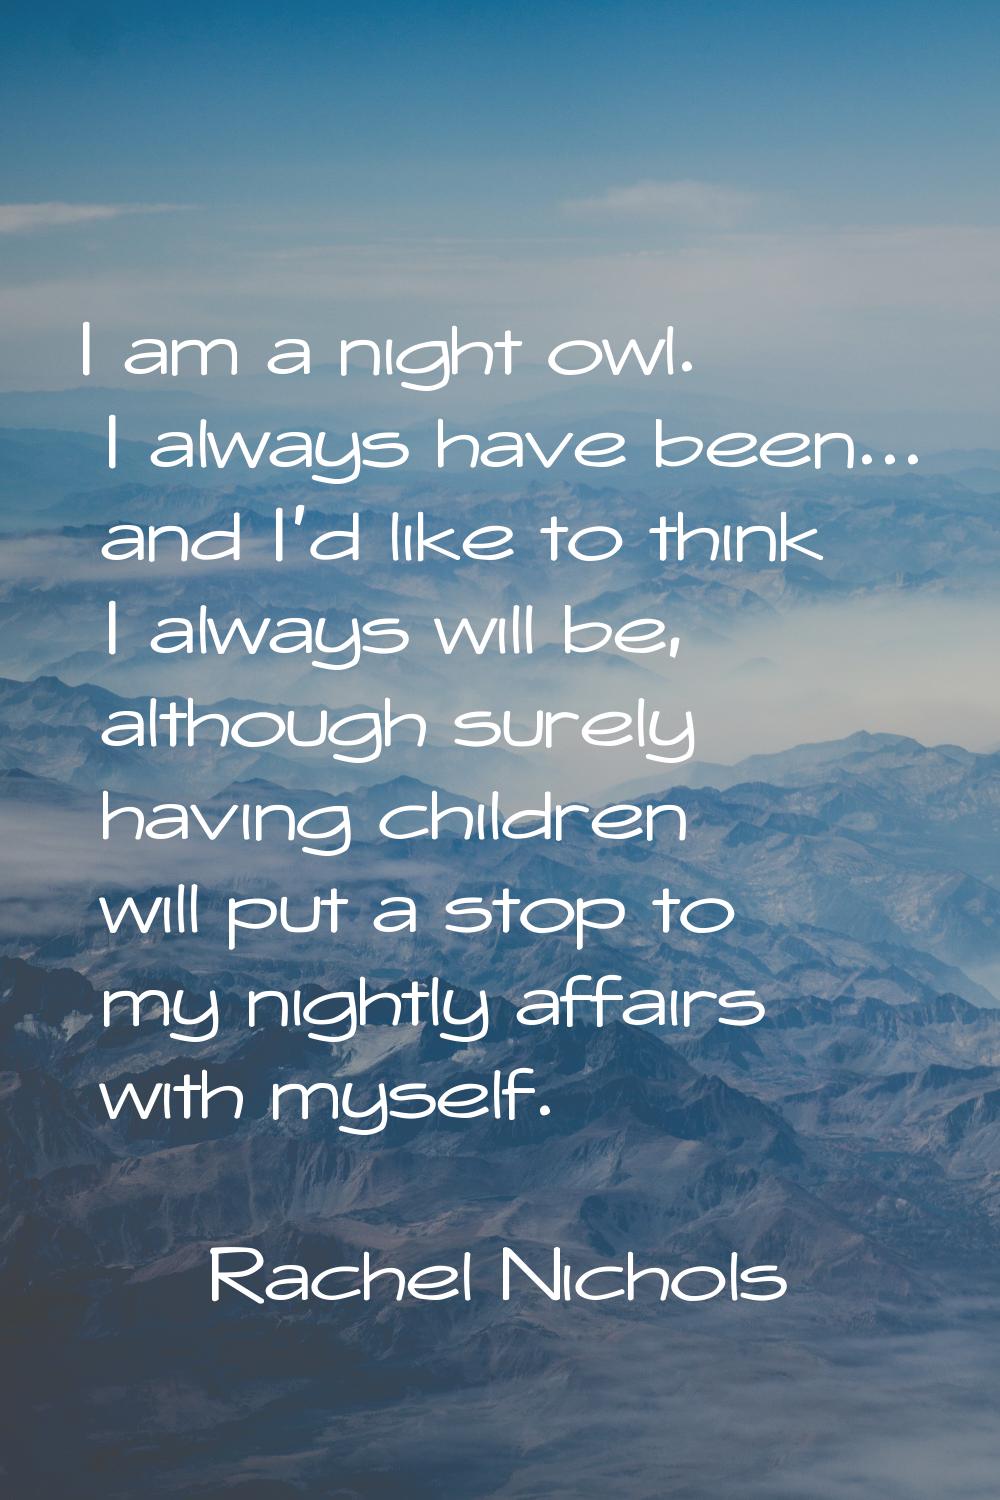 I am a night owl. I always have been... and I'd like to think I always will be, although surely hav